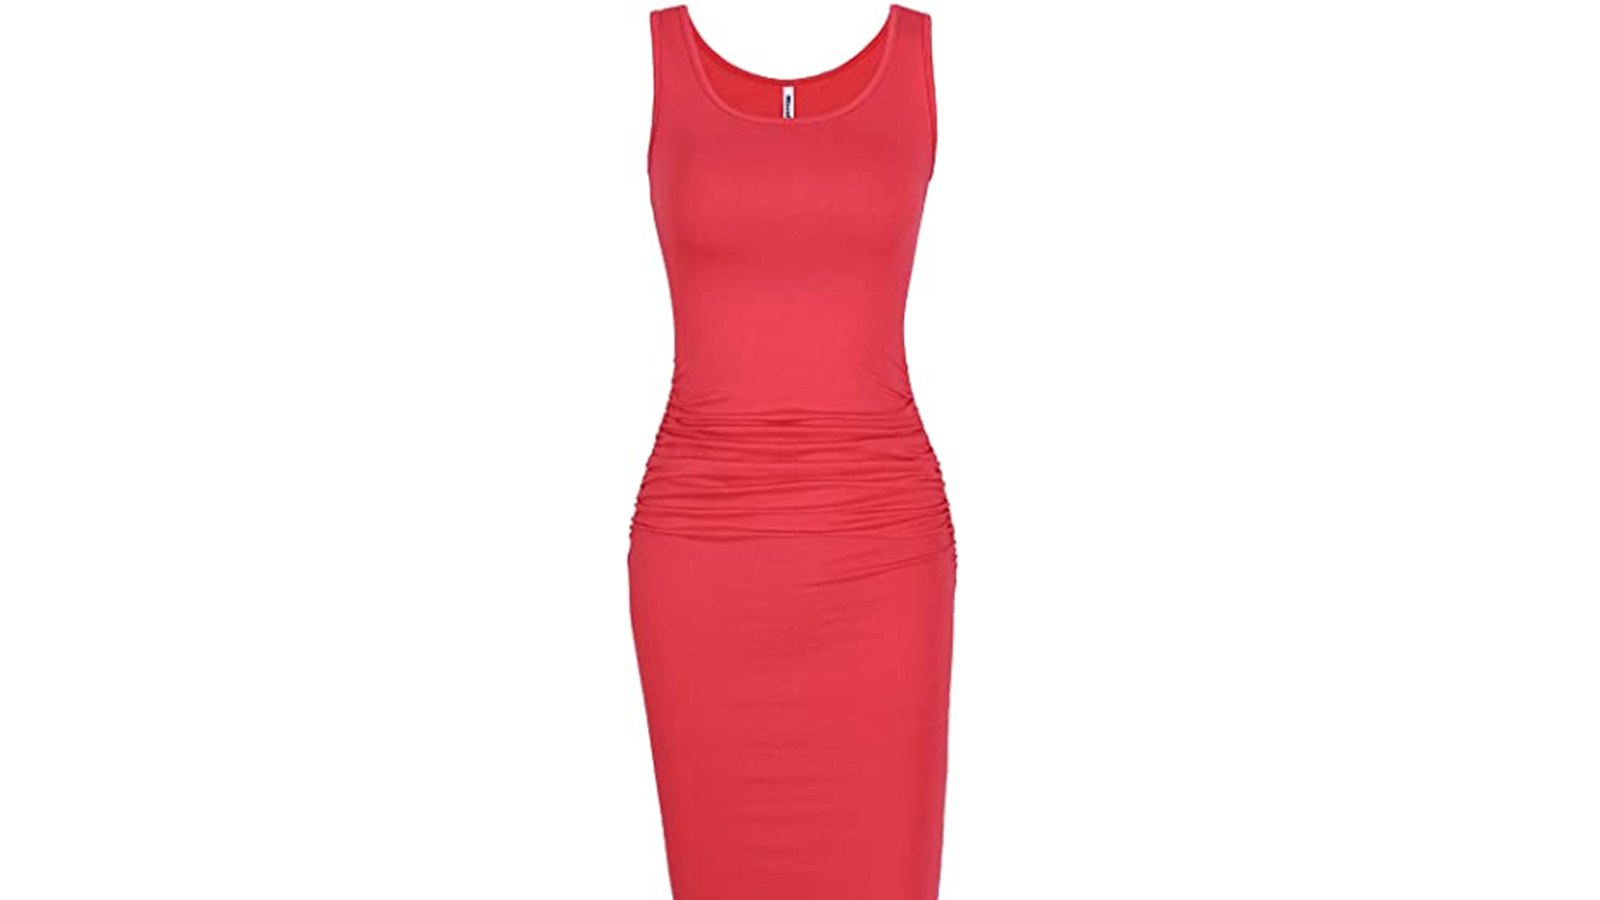 Missufe Stretchy Cotton Dress Is Endlessly Flattering